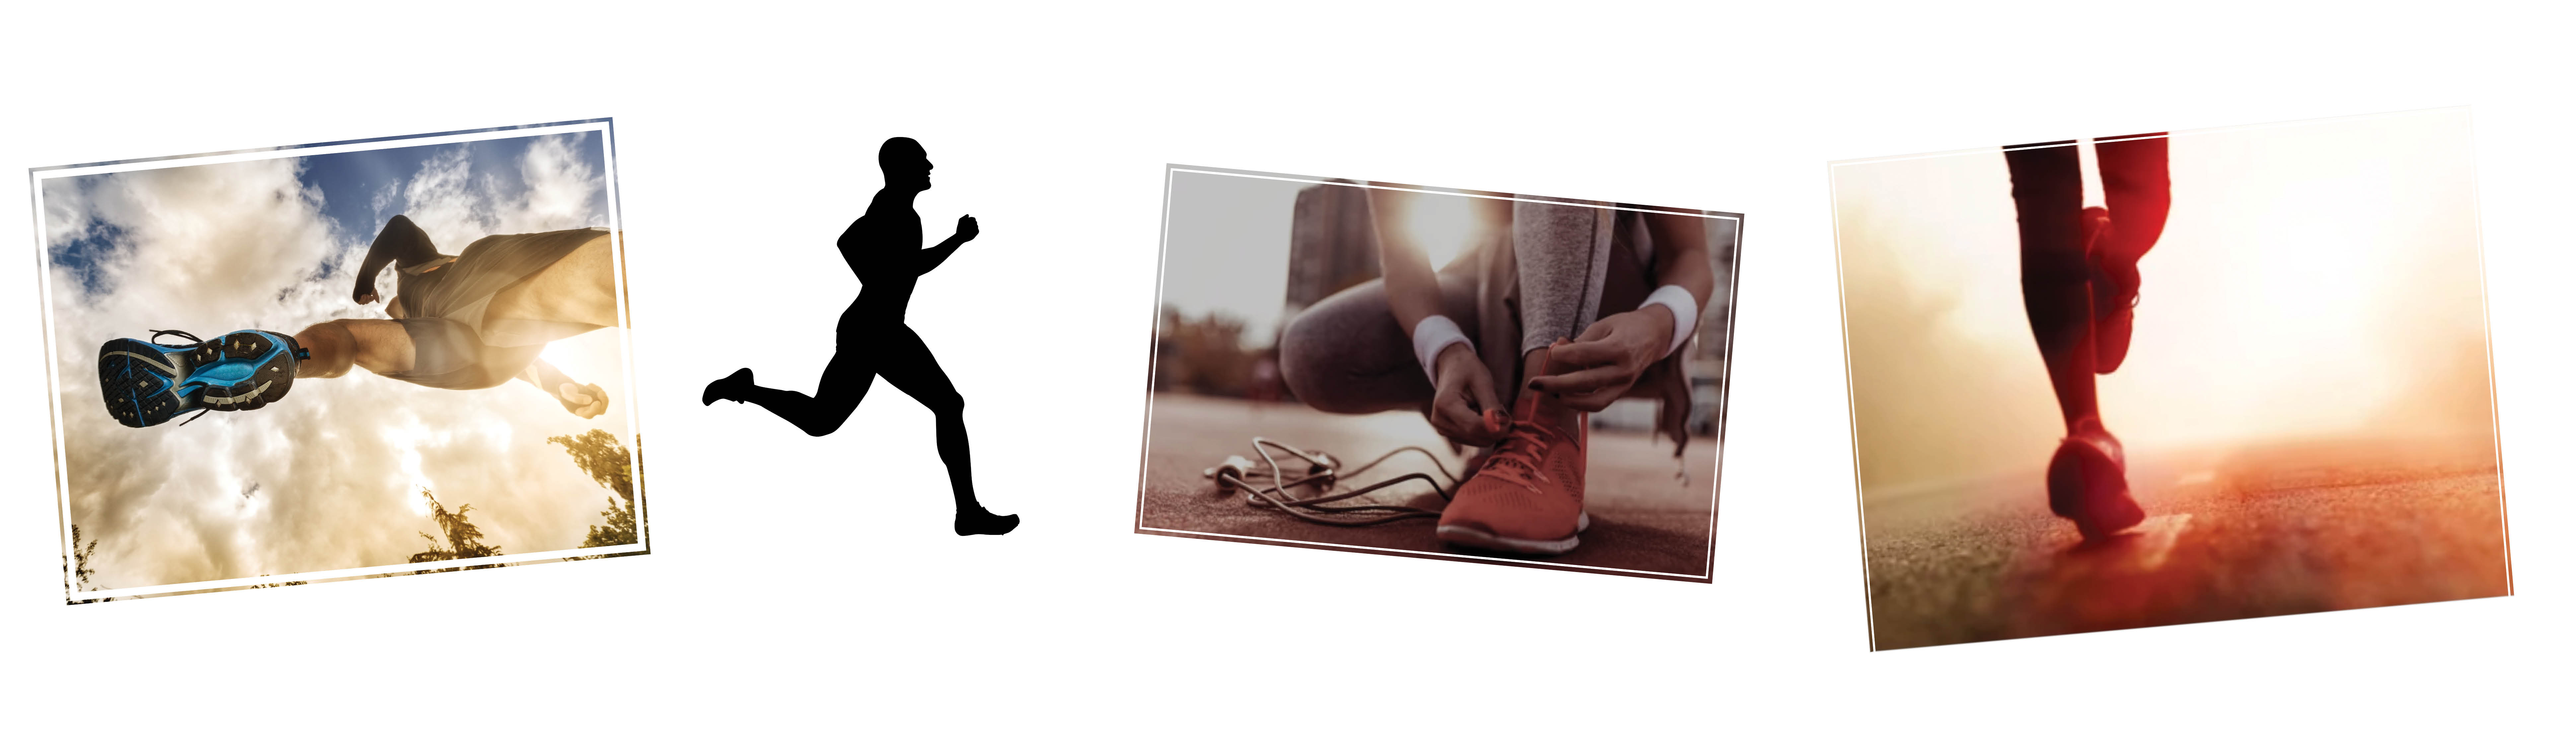 4 Exciting Pictures of Running Moments and Running Shoes.